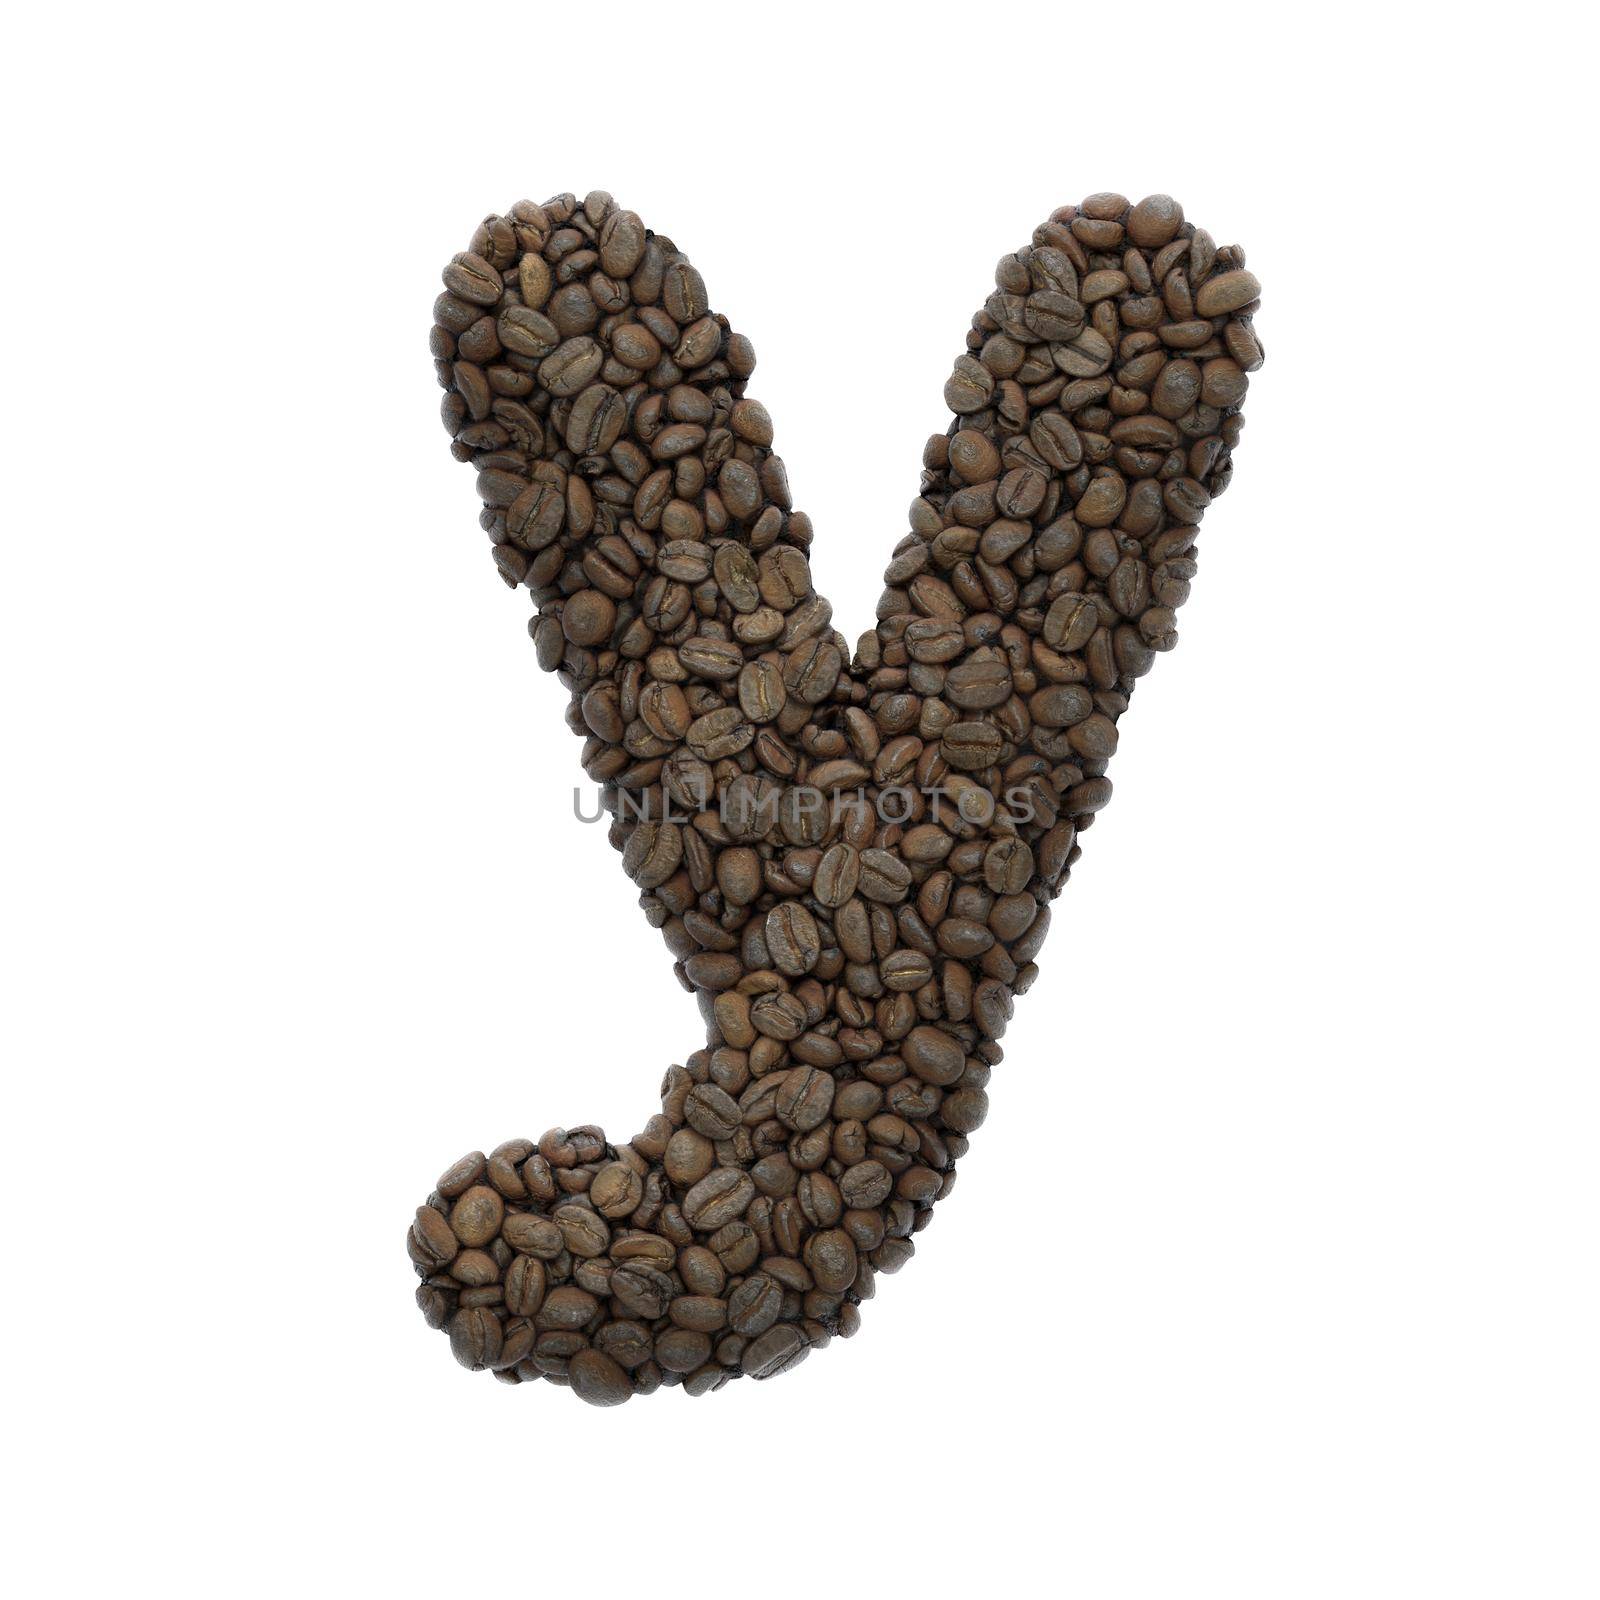 Coffee letter Y - Small 3d roasted beans font isolated on white background. This alphabet is perfect for creative illustrations related but not limited to Coffee, energy, insomnia...